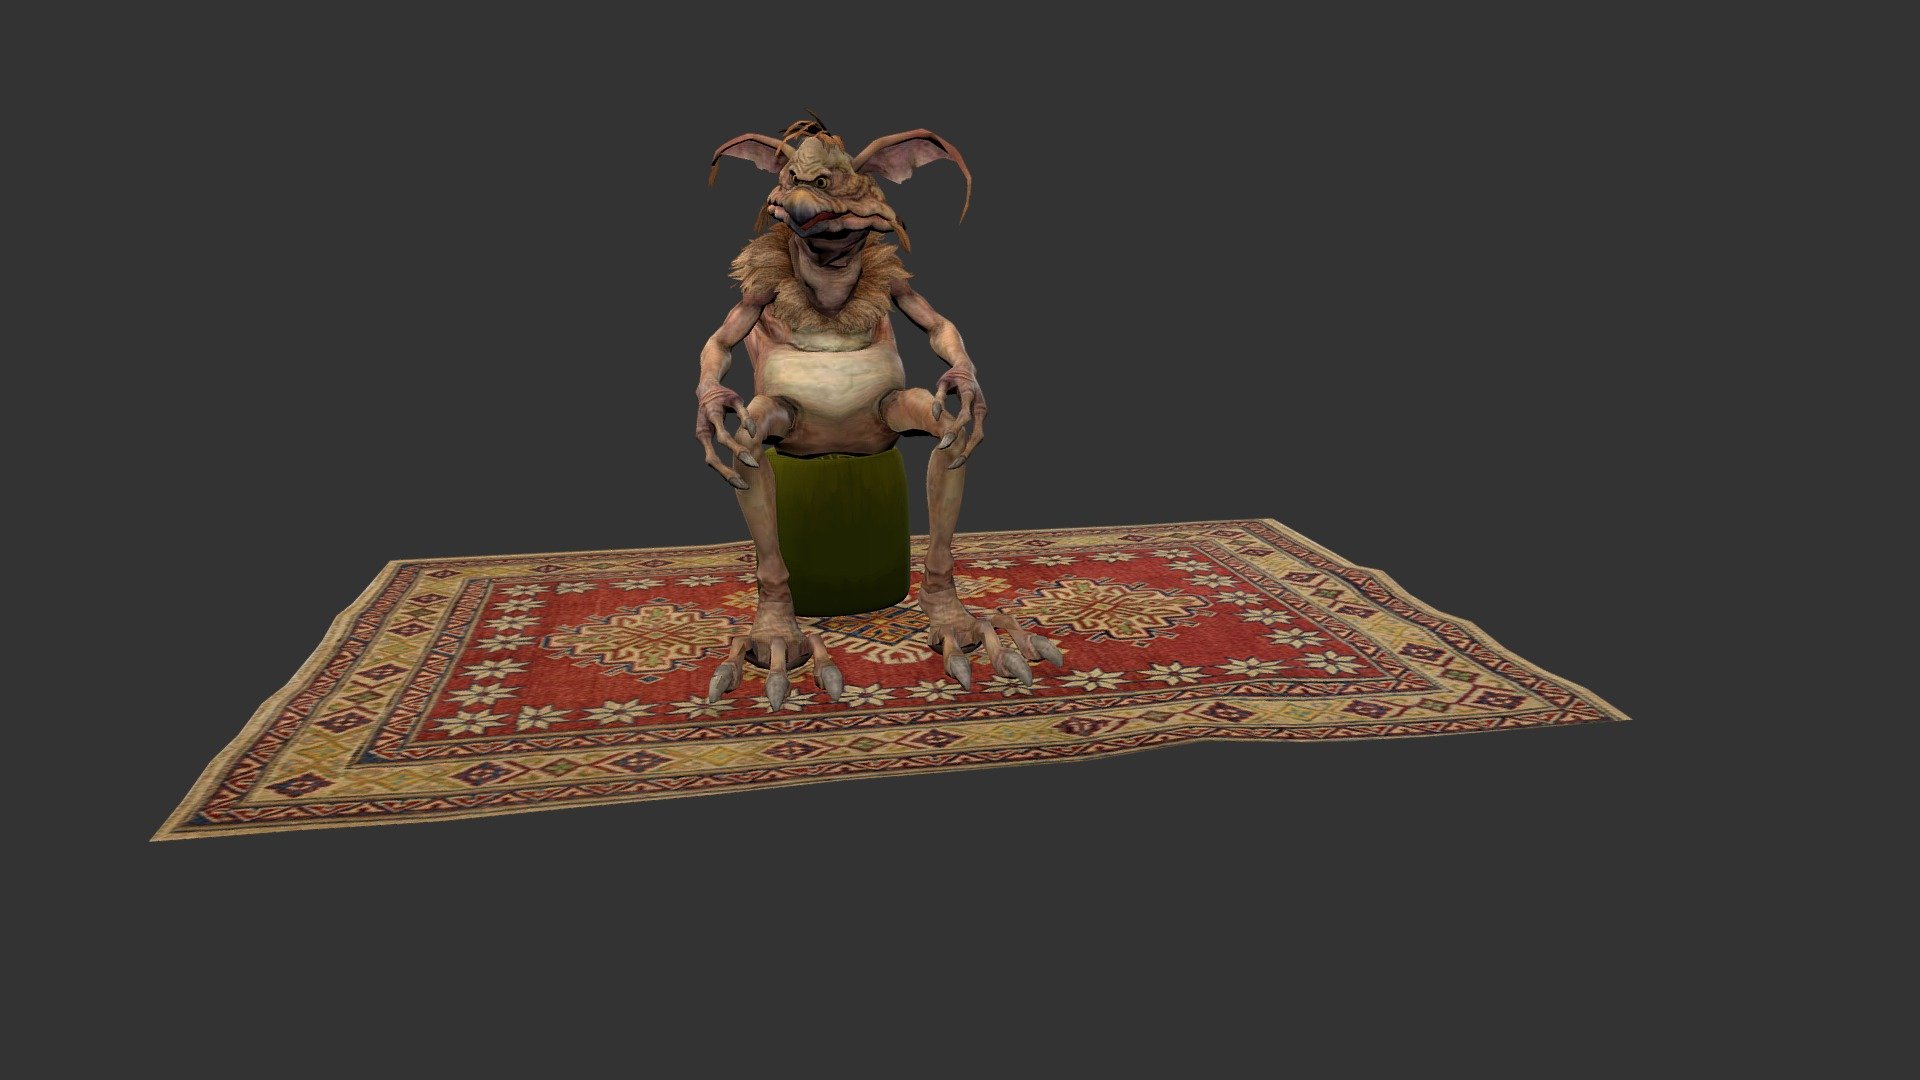 Salacious B. Crumb was a Kowakian monkey-lizard who worked as a jester in the court of the crime lord Jabba the Hutt.

Salacious B. Crumb is just one of the many Star Wars exhibits that can be seen in the Star Wars Virtual Museum.

Download the Star Wars Virtual Museum here:

http://www.starwarsvirtualmuseum.com - Salacious Crumb - 3D model by Mind Mulch for The Masses (@mindmulchforthemasses) 3d model